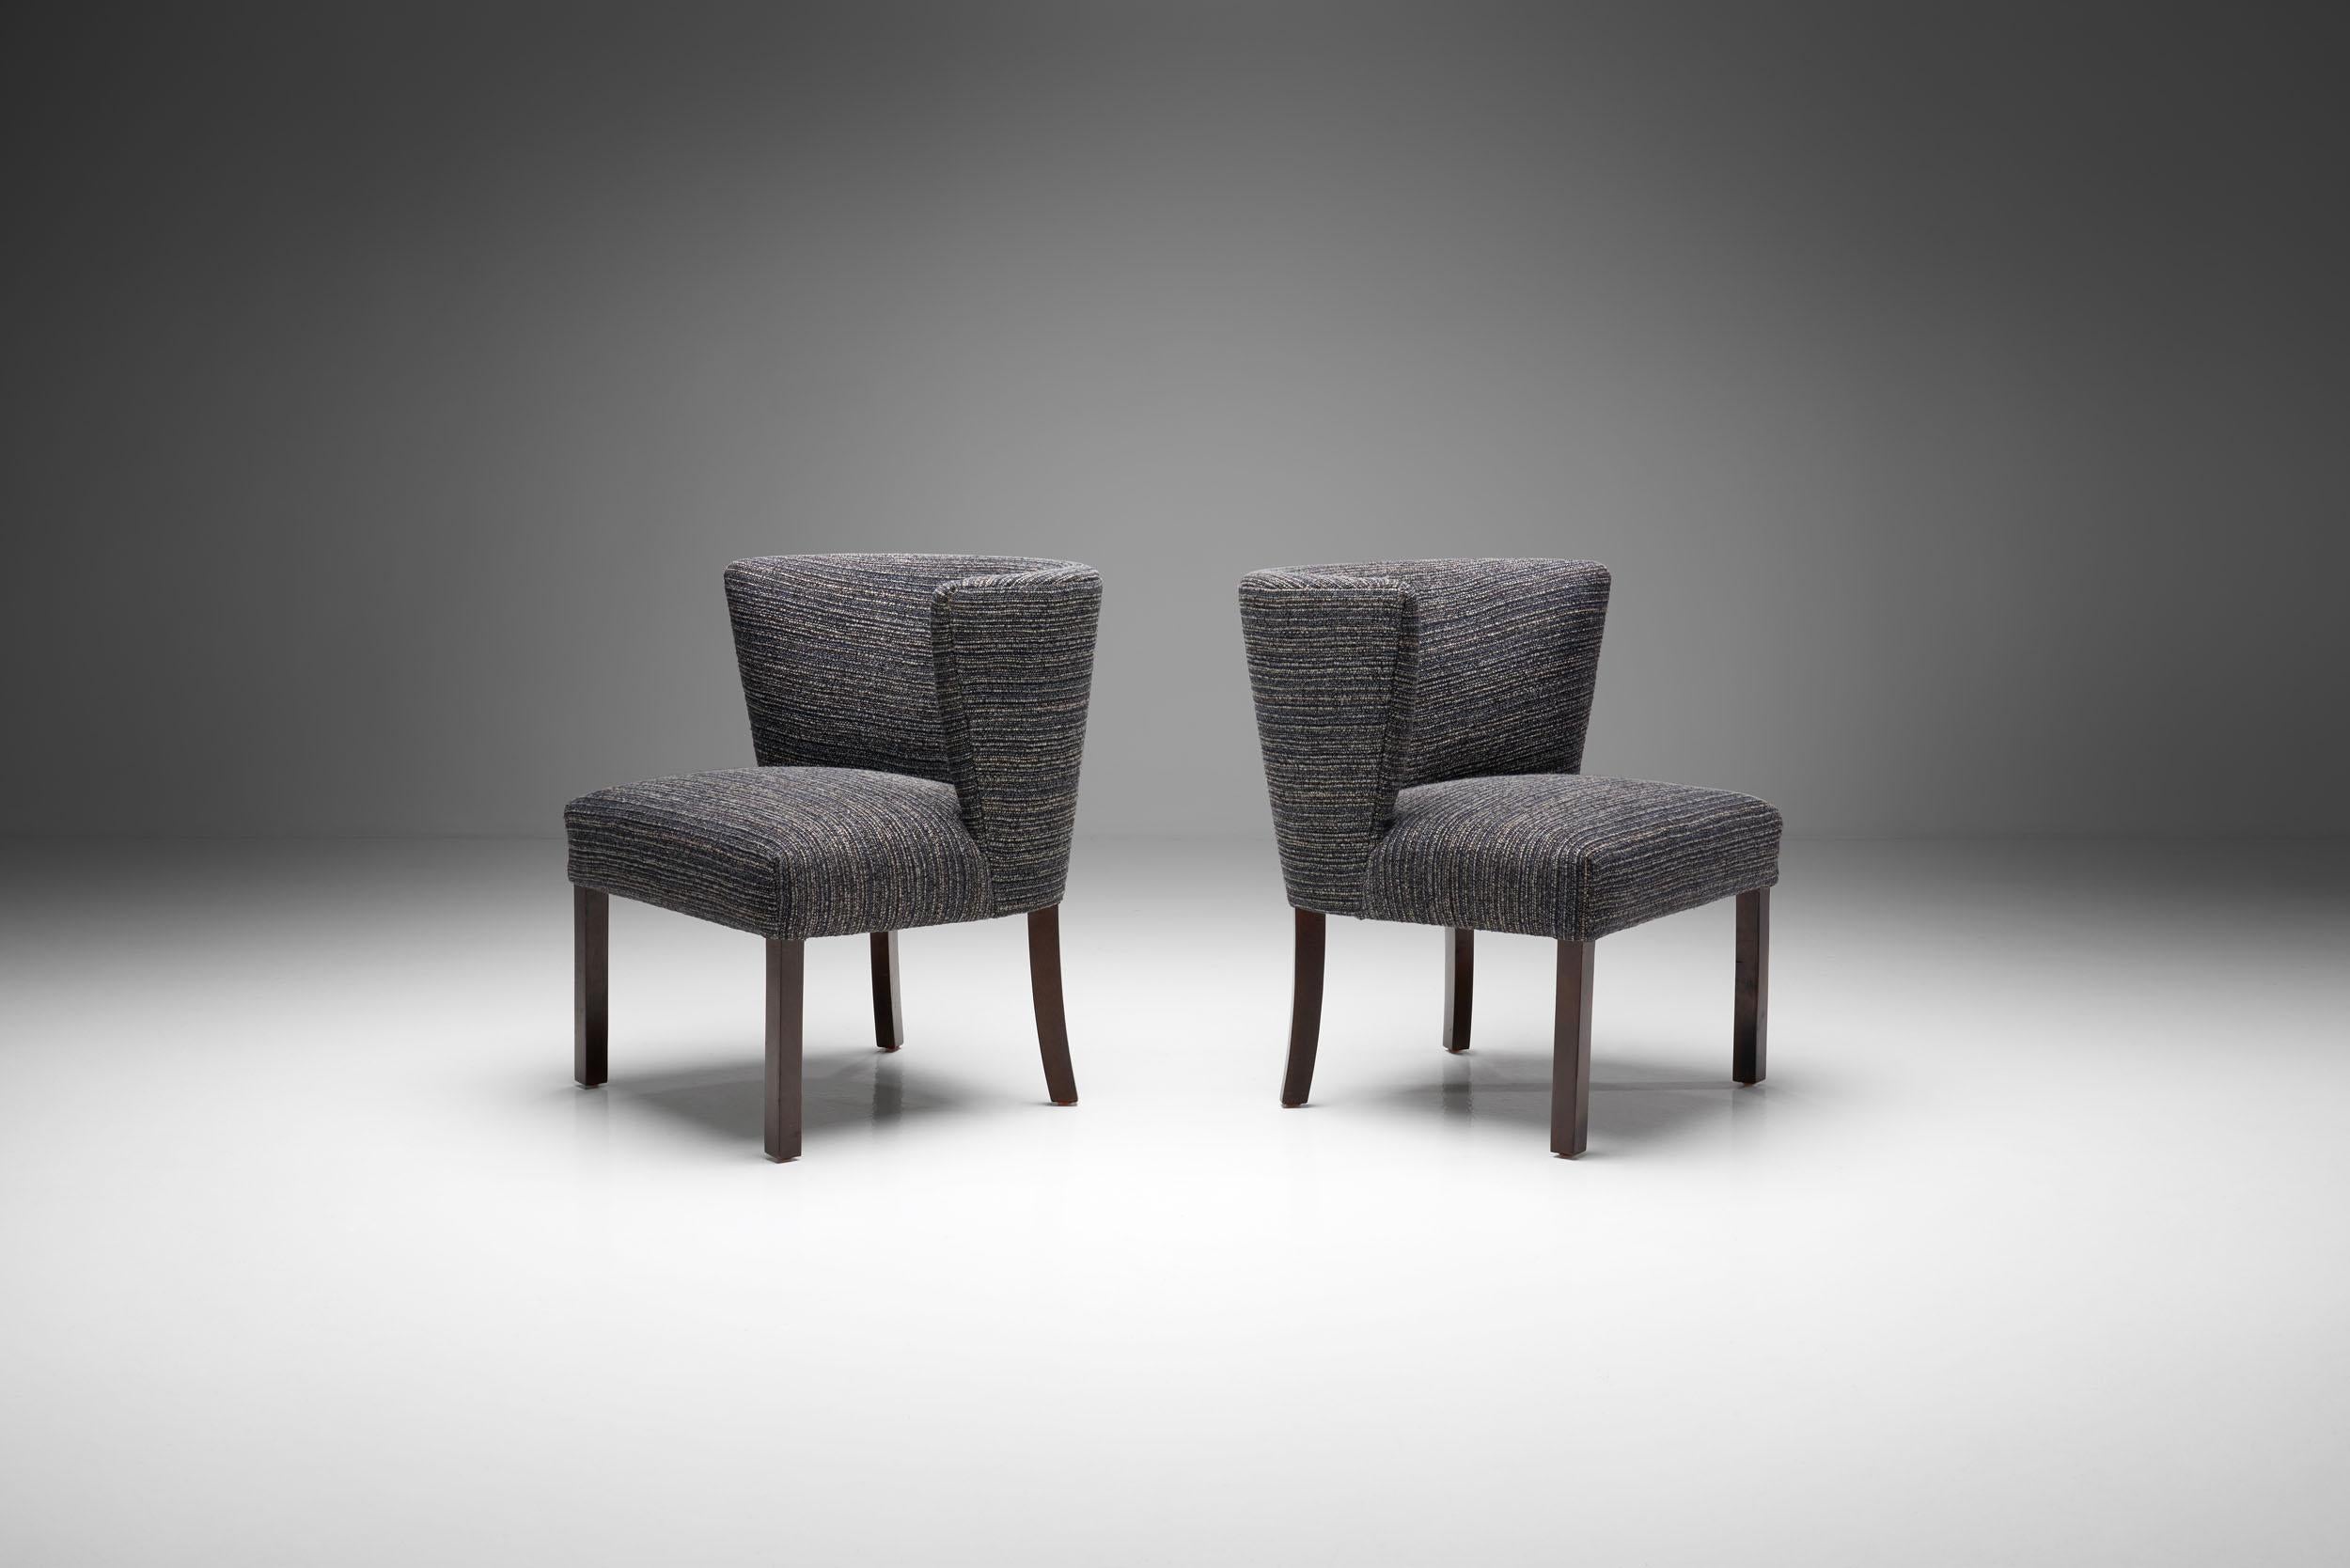 Pair of Model 1514 chairs designed by the eponymous manufactory Fritz Hansen in the 1940s. This pair of lounge chairs feature stained beech legs. The back legs are slightly bent, which is a unique characteristic of Fritz Hansen’s designs. The seats